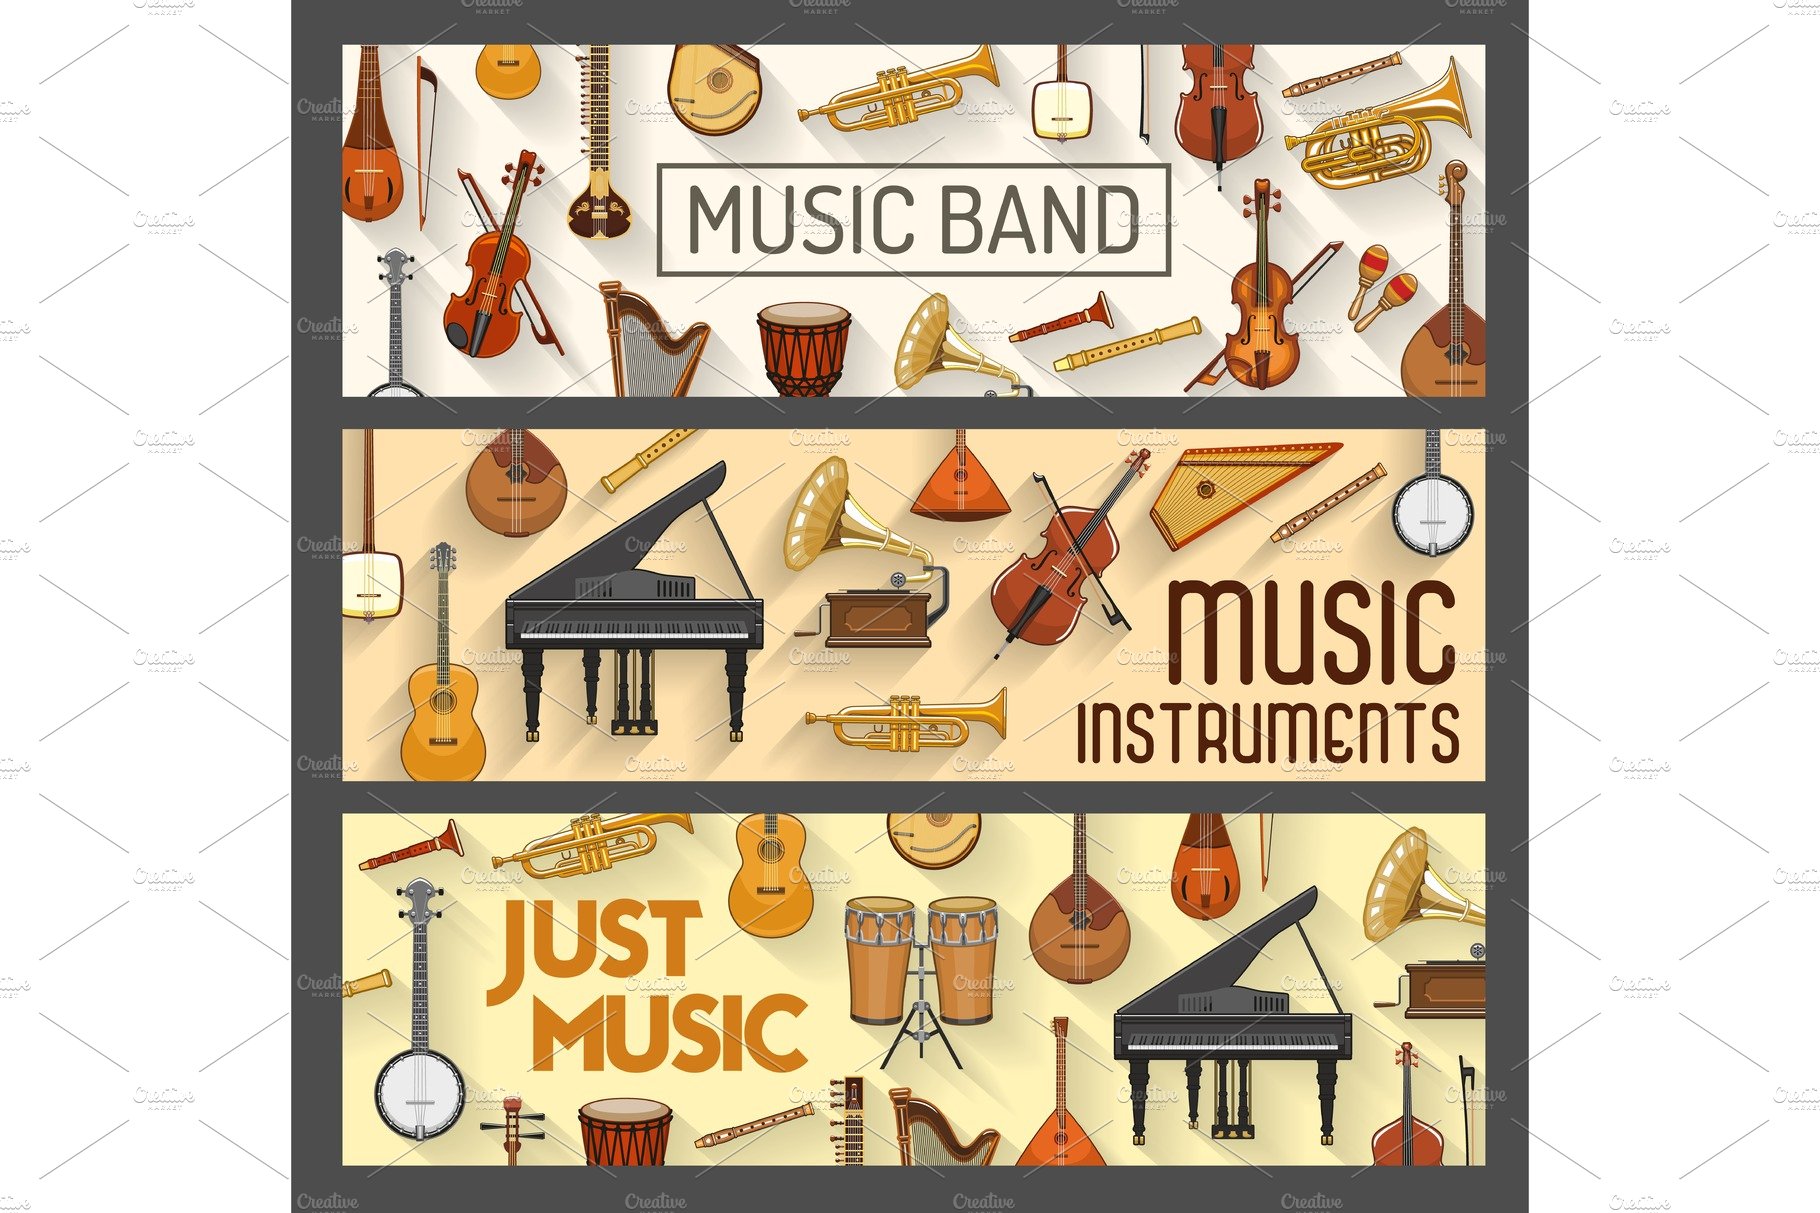 Musical instruments, music band cover image.